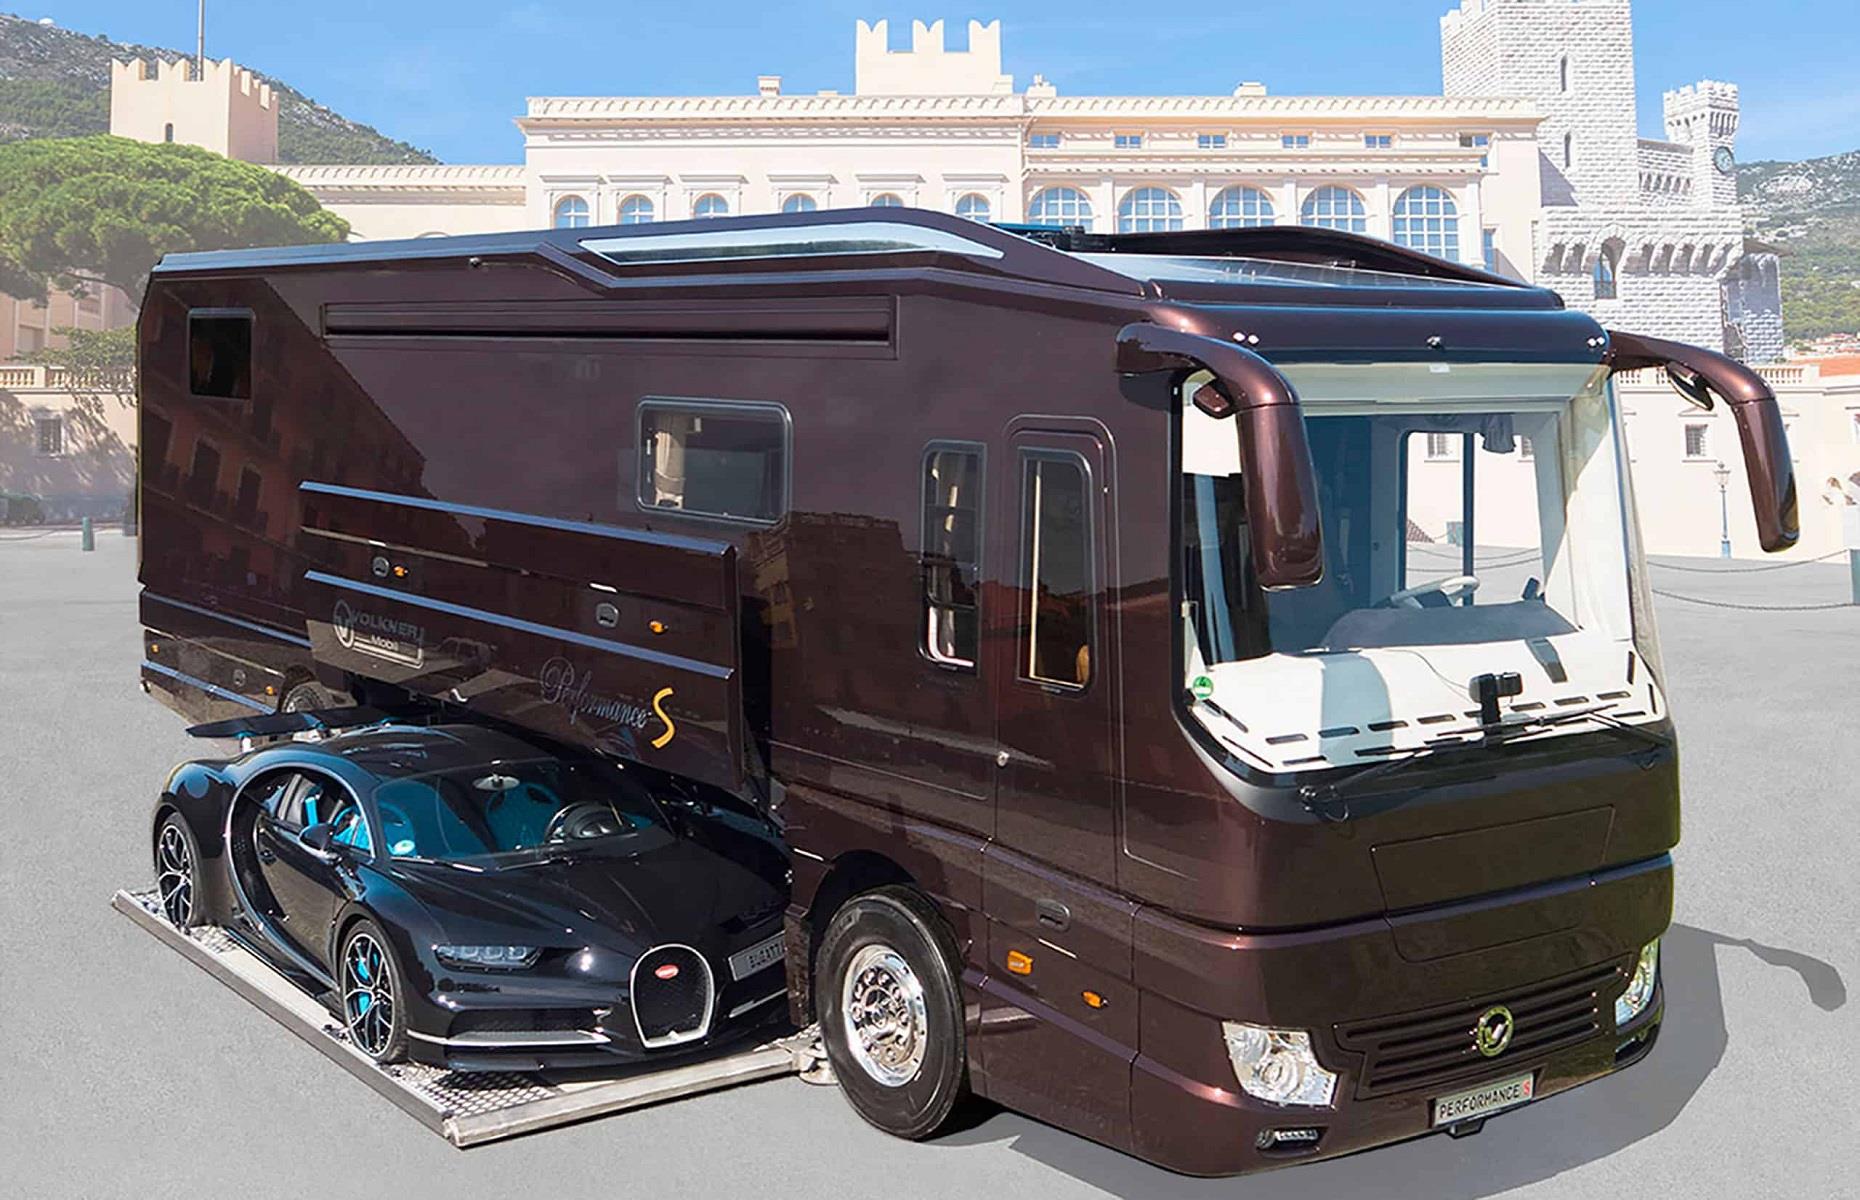 <p>This stunning motorhome by luxury German manufacturer, Volkner Mobil, wows with its built-in hydraulic garage compartment, for when you have to take your sports car on the road with you, naturally. Their 39-foot-long <a href="https://volkner-mobil.com/en/performance-s/">Performance S model</a> will set you back an impressive $2.2 million, or €2 million, and comes kitted out with a state-of-the-art engine.</p>